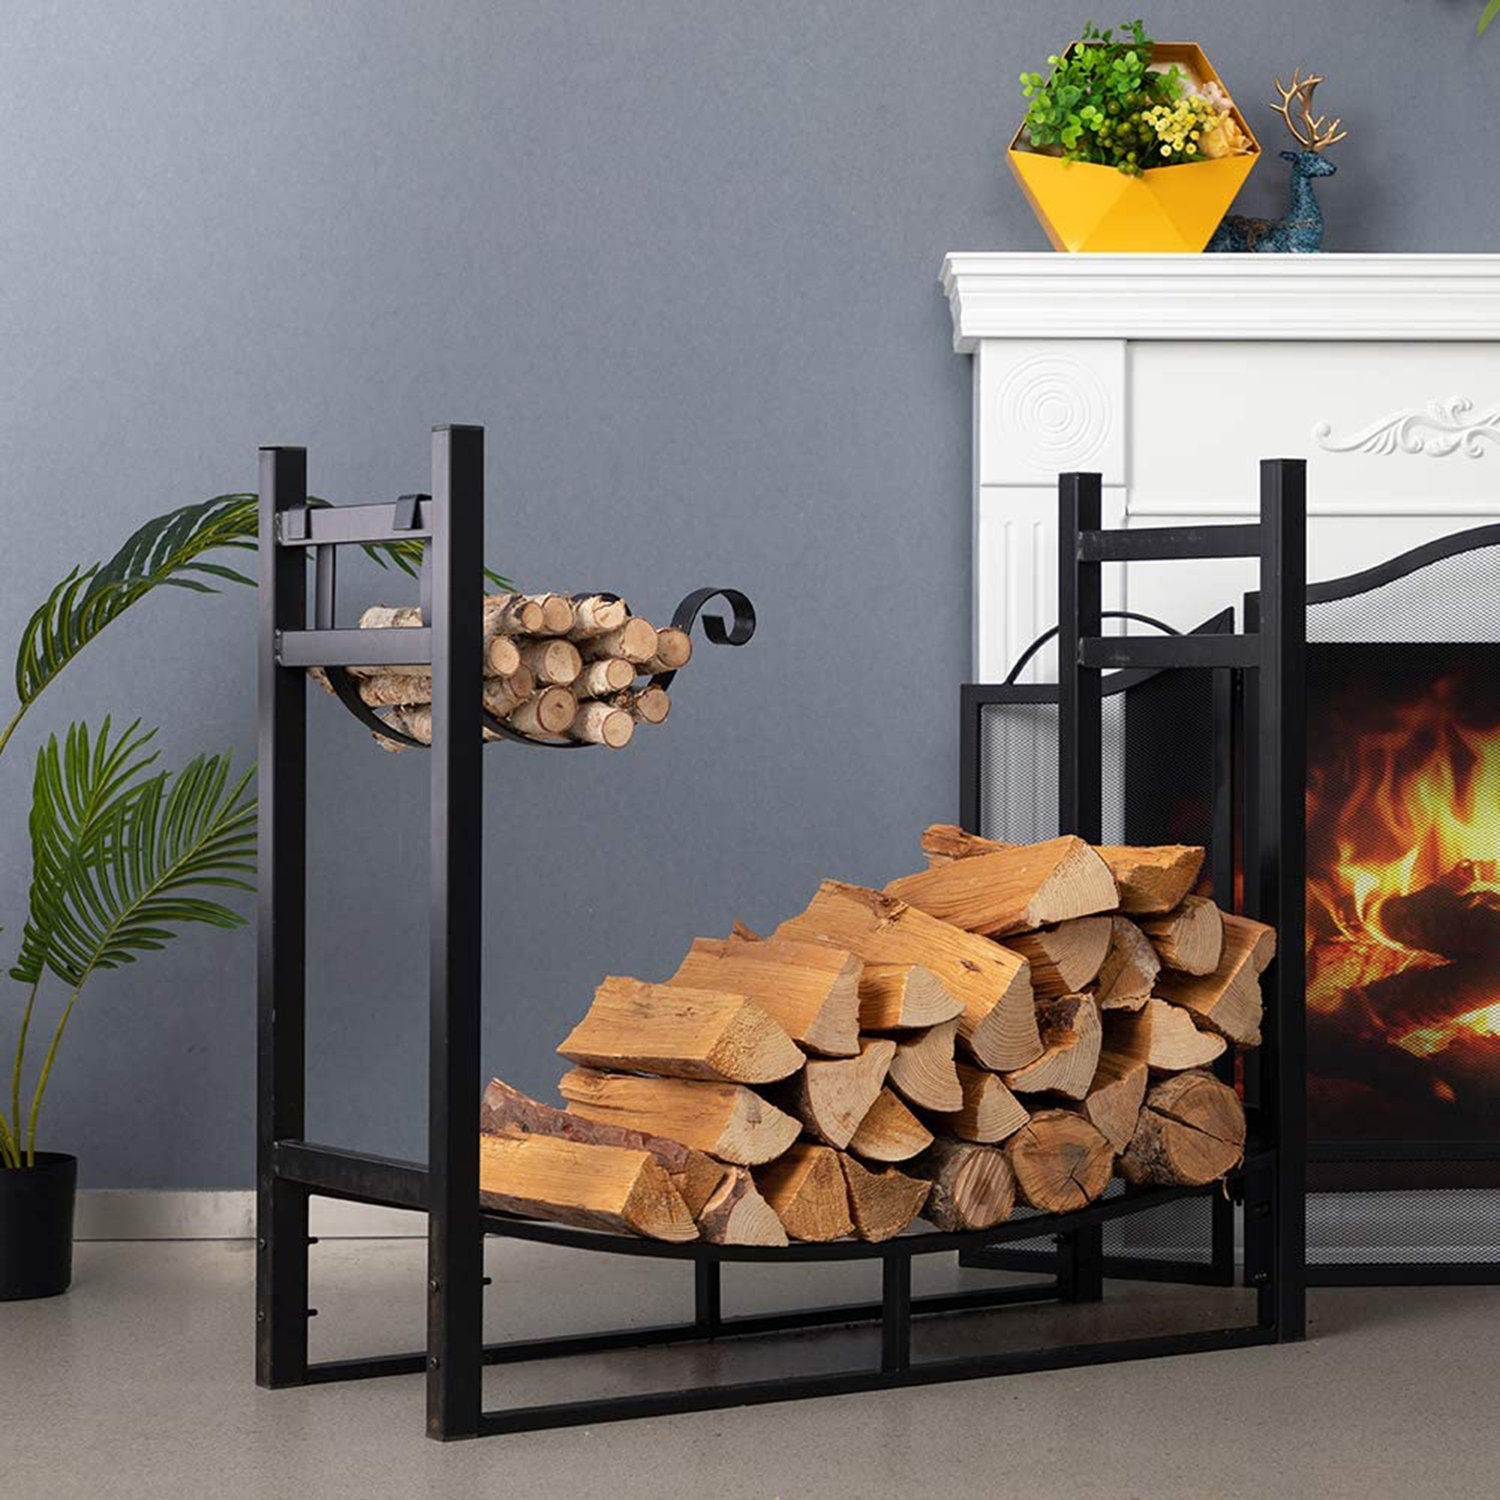 4ft Outdoor Firewood Log Rack for Fireplace Heavy Duty Wood Stacking Holder for Patio Deck Metal Kindling Logs Storage Stand Steel Tubular Wood Pile Racks Outside Fire place Tools Accessories Black Amagabeli